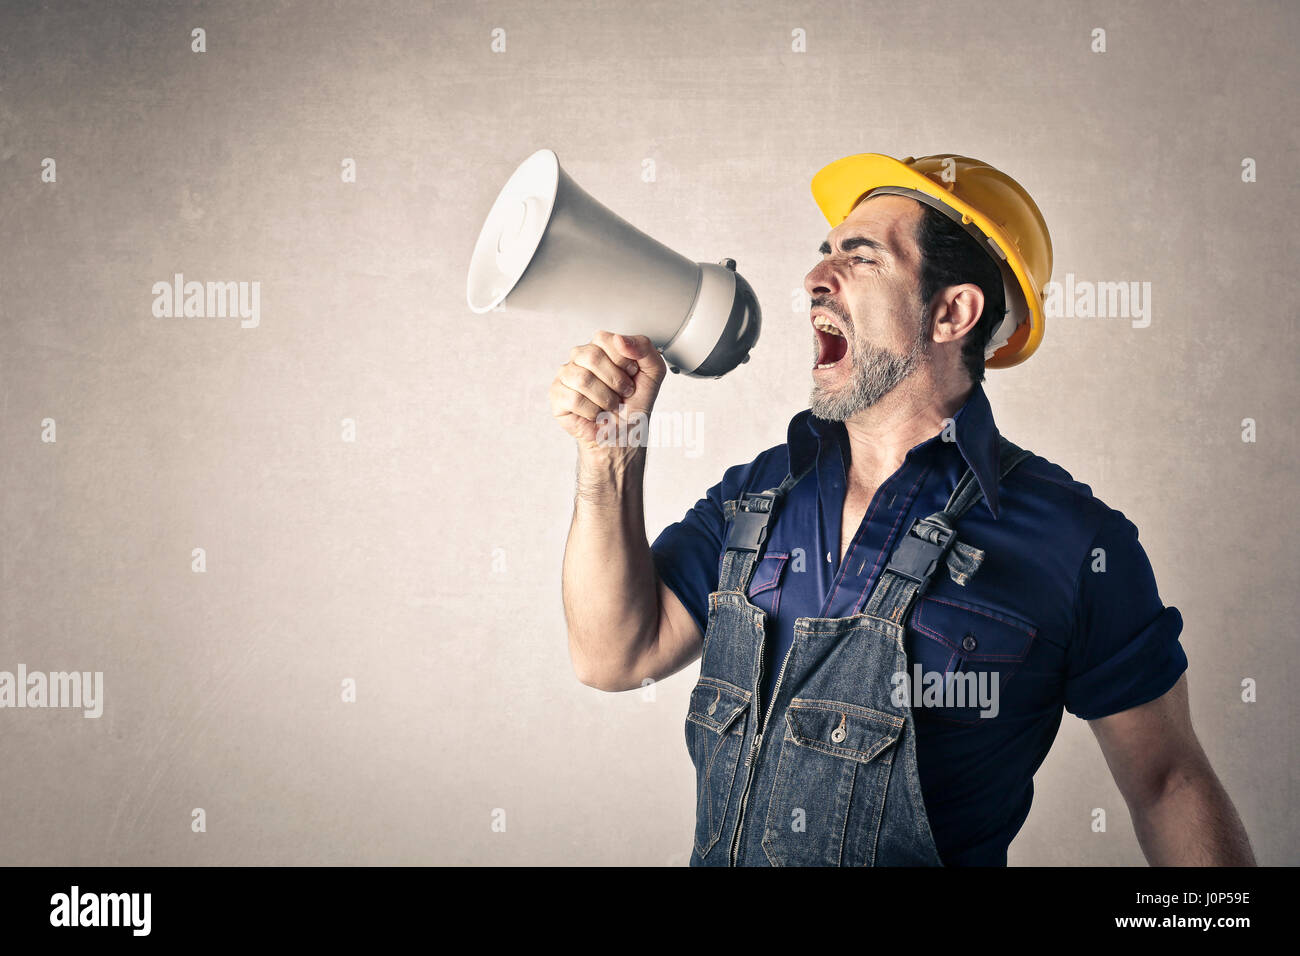 Construction worker with megaphone Stock Photo